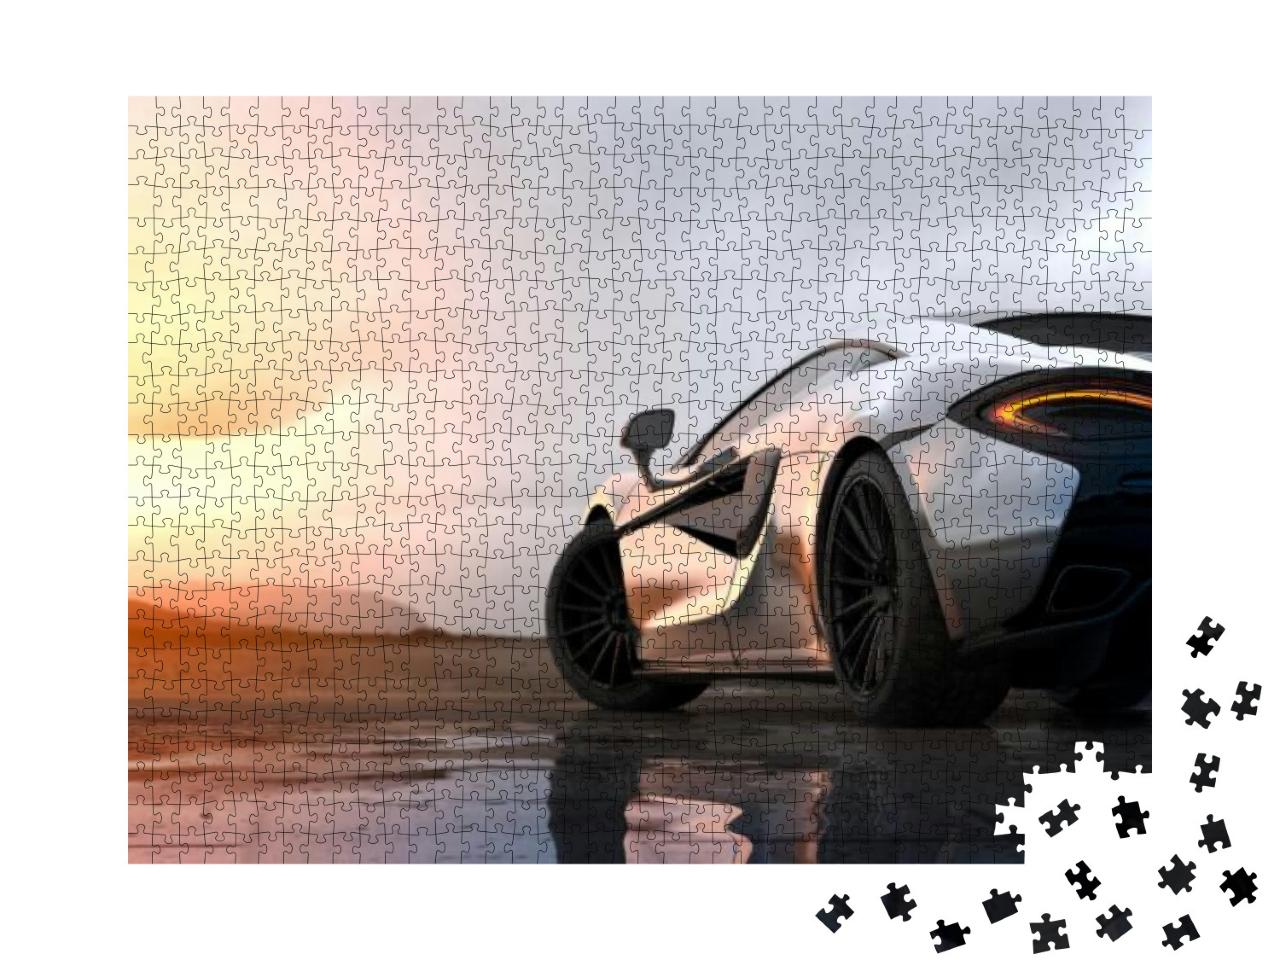 Silver Luxury Sports Car Sunset Scene with Grunge Overlay... Jigsaw Puzzle with 1000 pieces